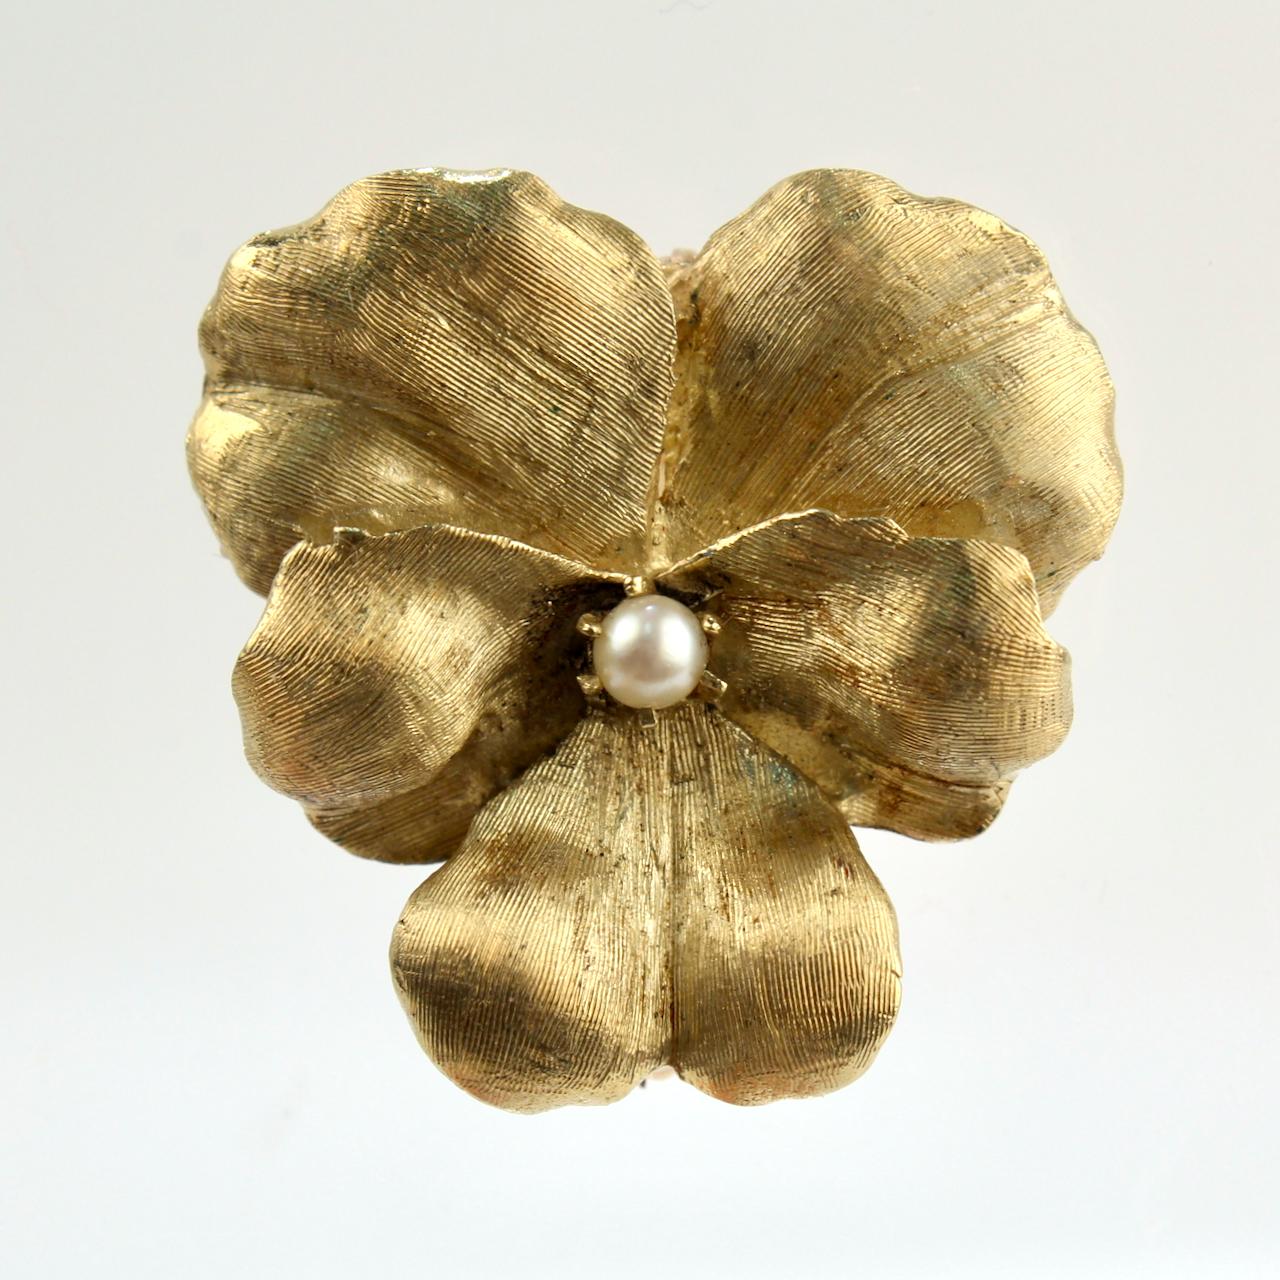 A very fine gold brooch in the form of a Pansy. 

With brushed gold petals and center set with a small round, white pearl.

A finely worked and delicate pin!

Date:
20th Century

Overall Condition:
It is in overall good, as-pictured, used estate